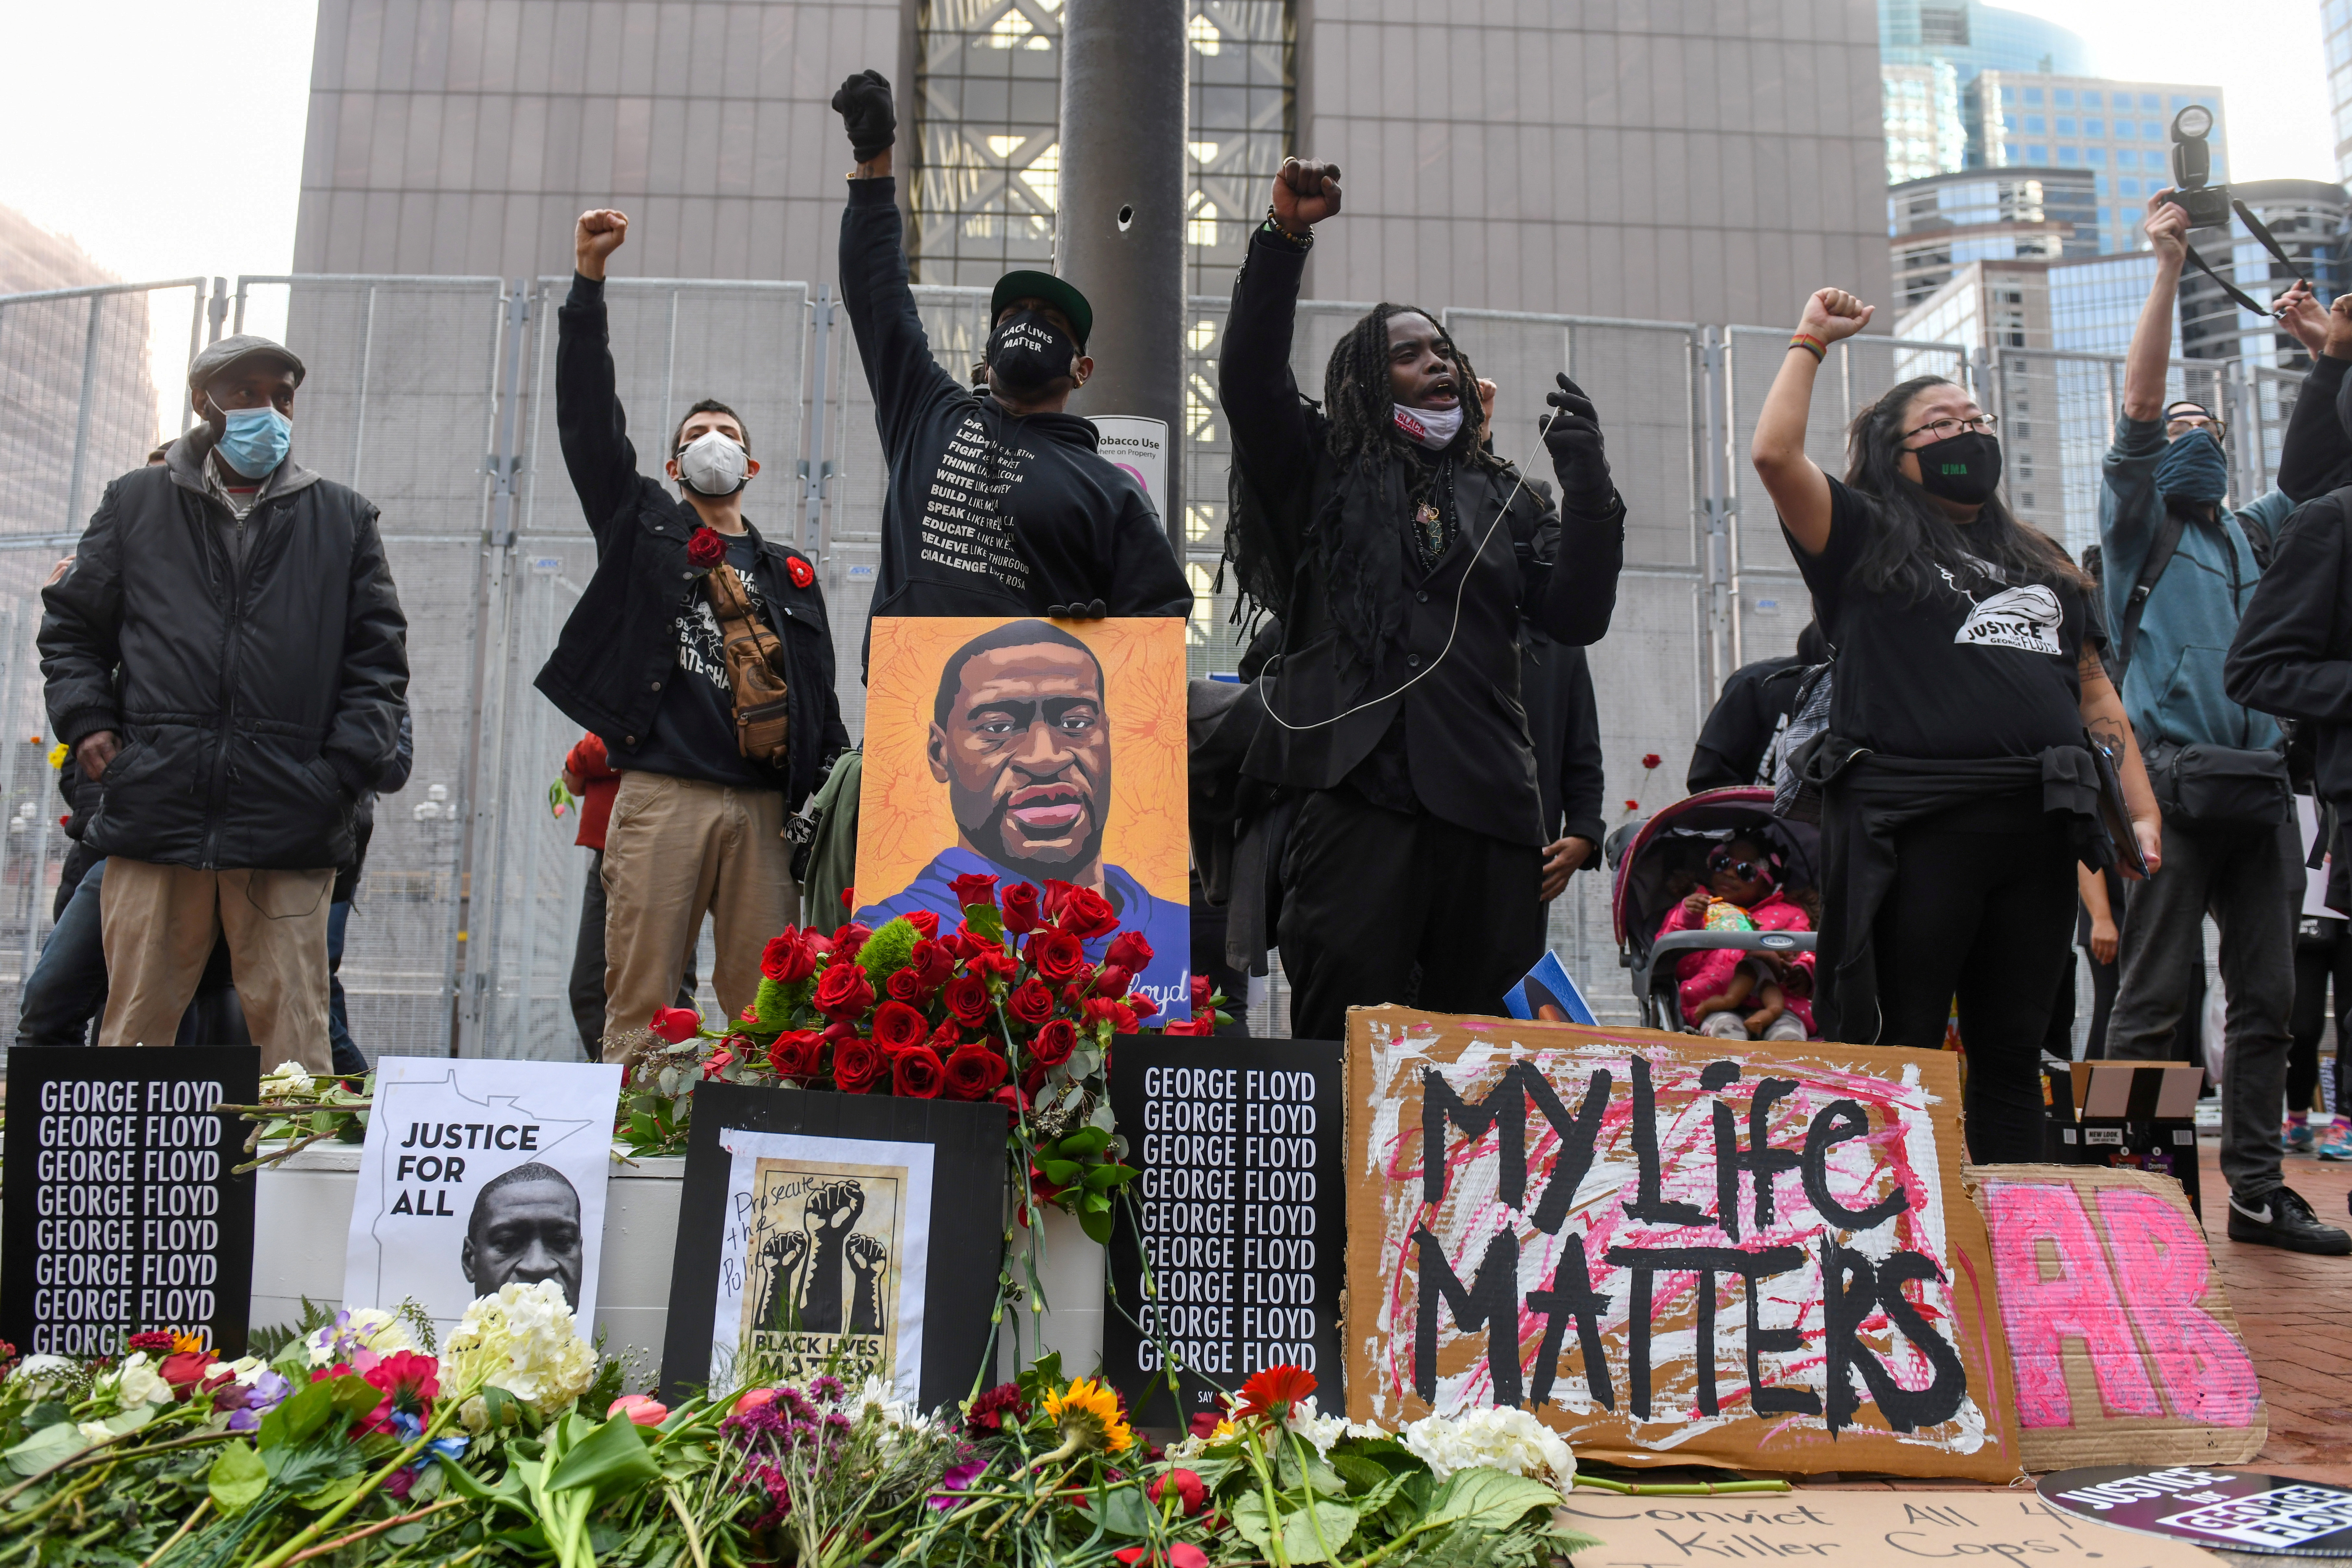 Protesters raise their fists and chant after the "I Can't Breathe" Silent March for Justice a day before jury selection is scheduled to begin for the trial of Derek Chauvin, the former Minneapolis policeman accused of killing George Floyd, in Minneapolis, Minnesota, U.S. March 7, 2021. REUTERS/Nicholas Pfosi